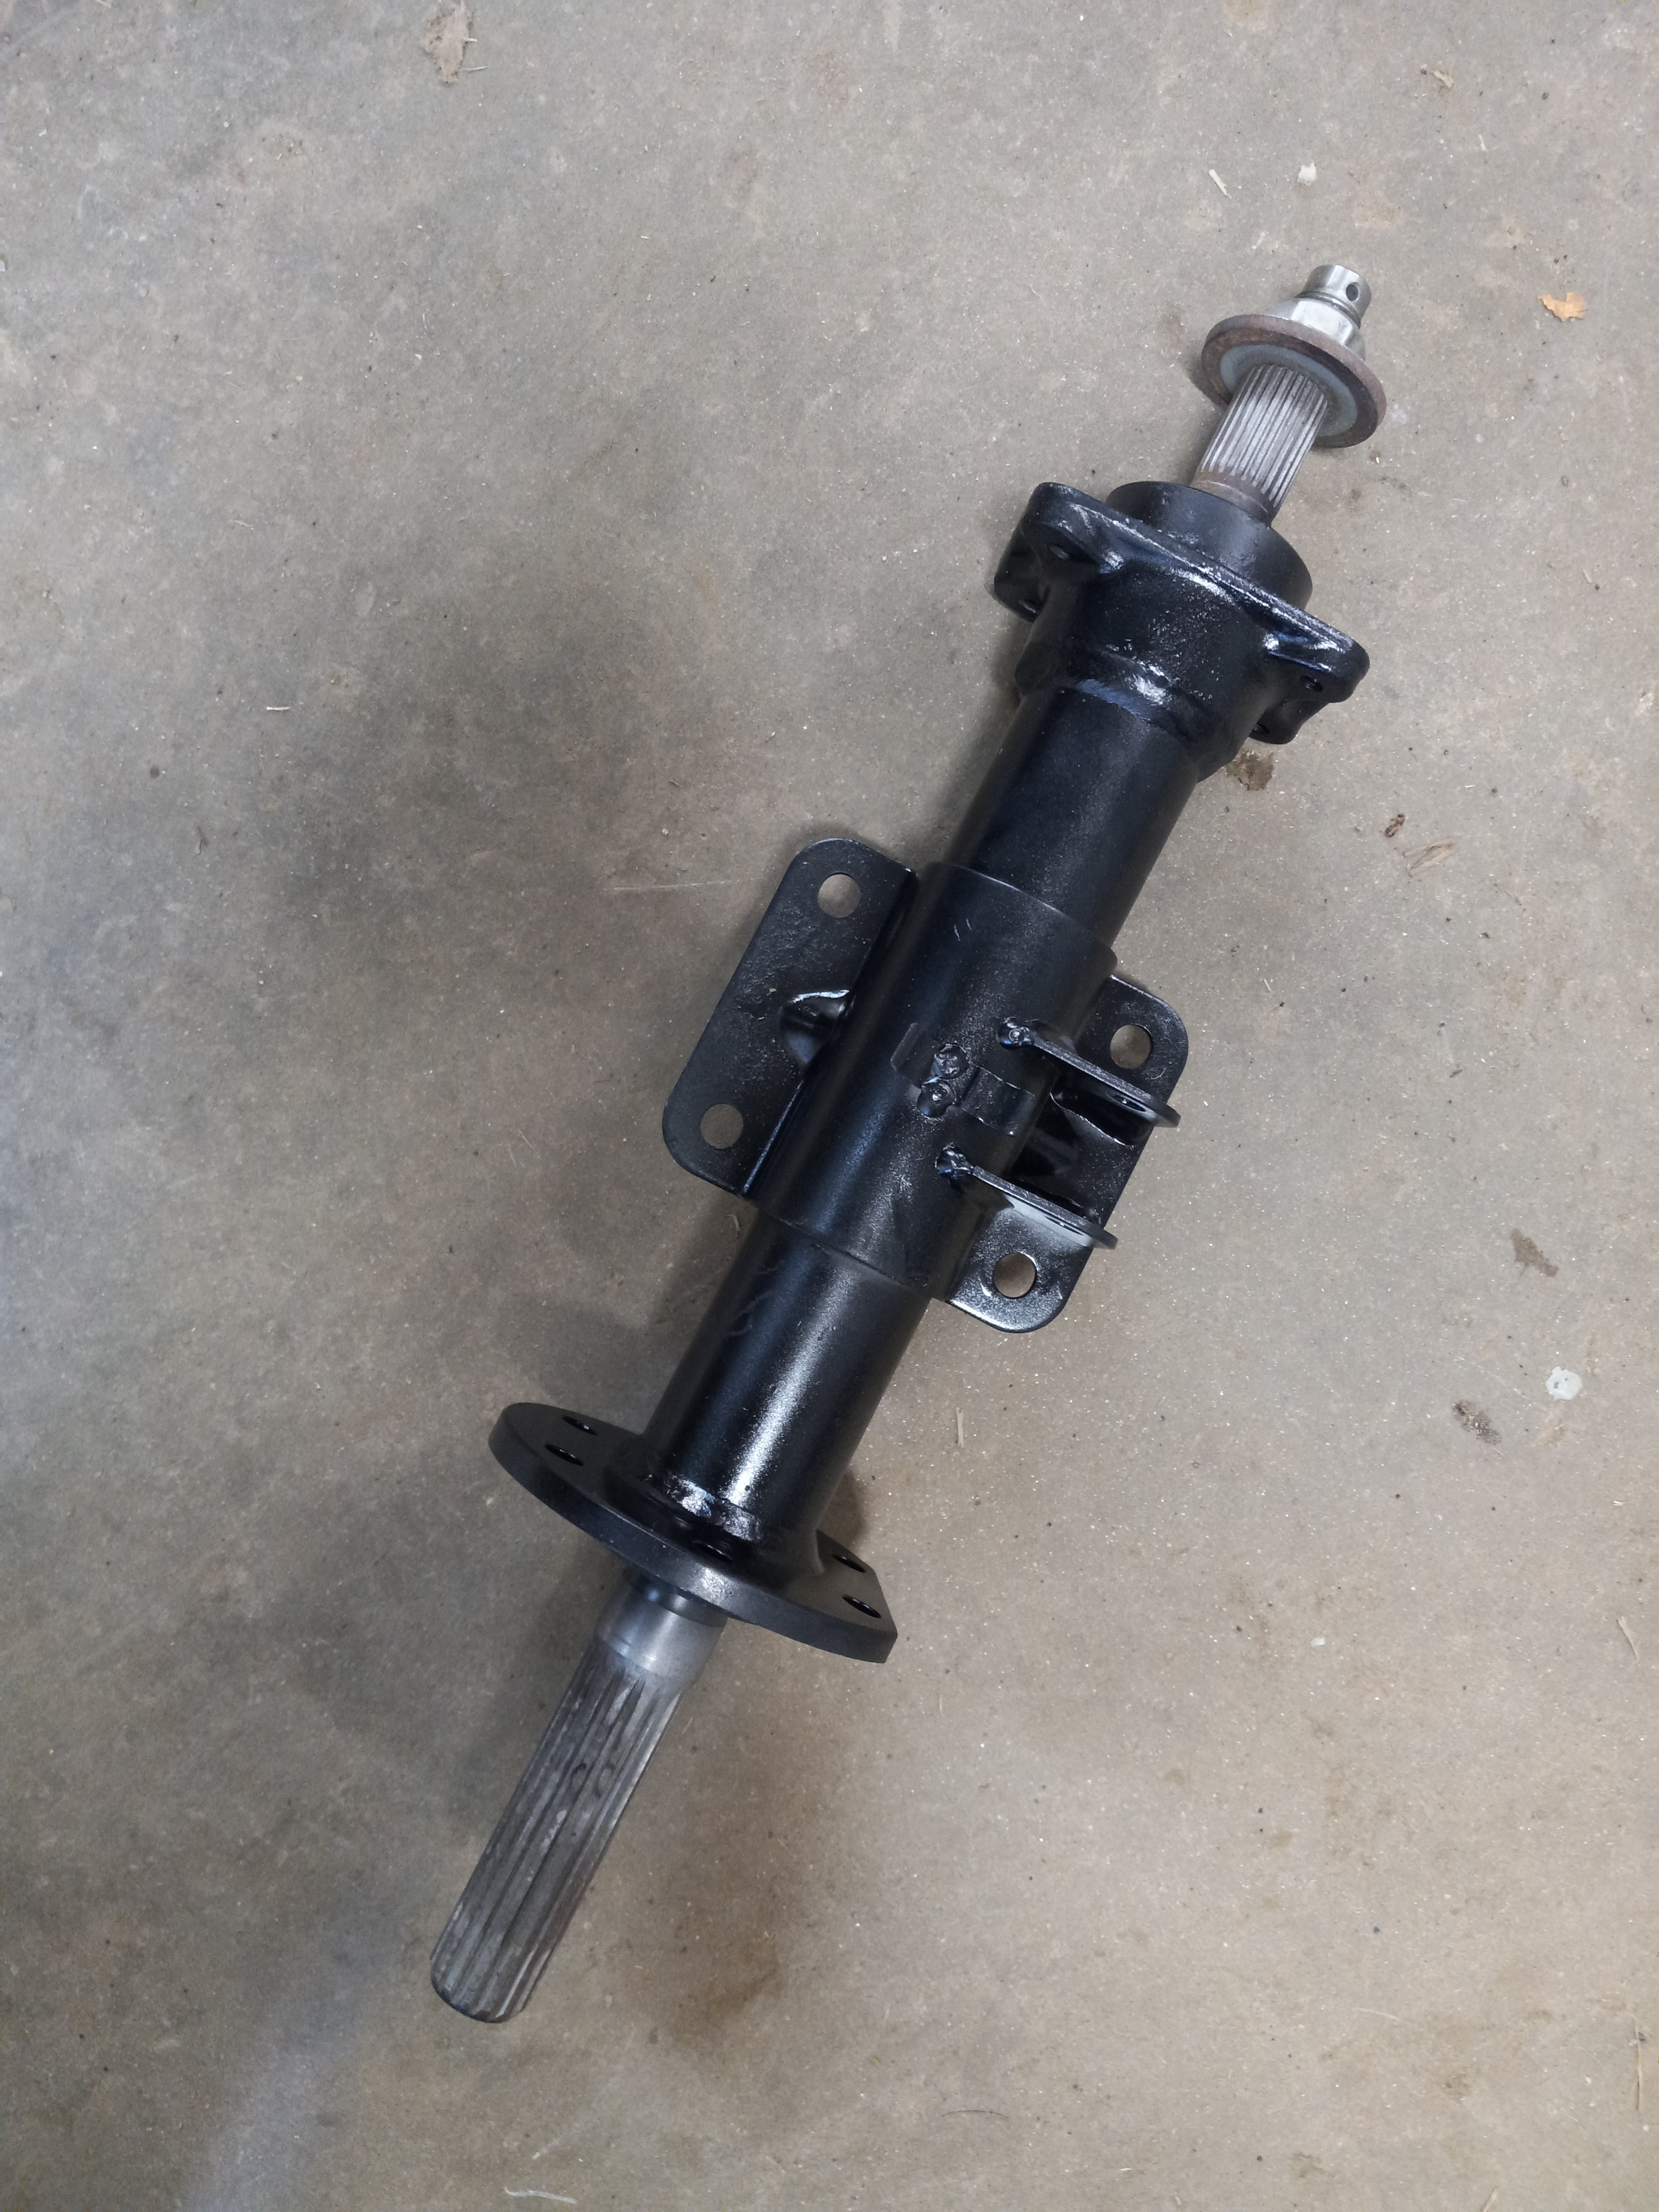 REAR AXLE AND HOUSING IN GREAT CONDITION! 05-2010 KAWASAKI MULE 600 & 610  L.H 